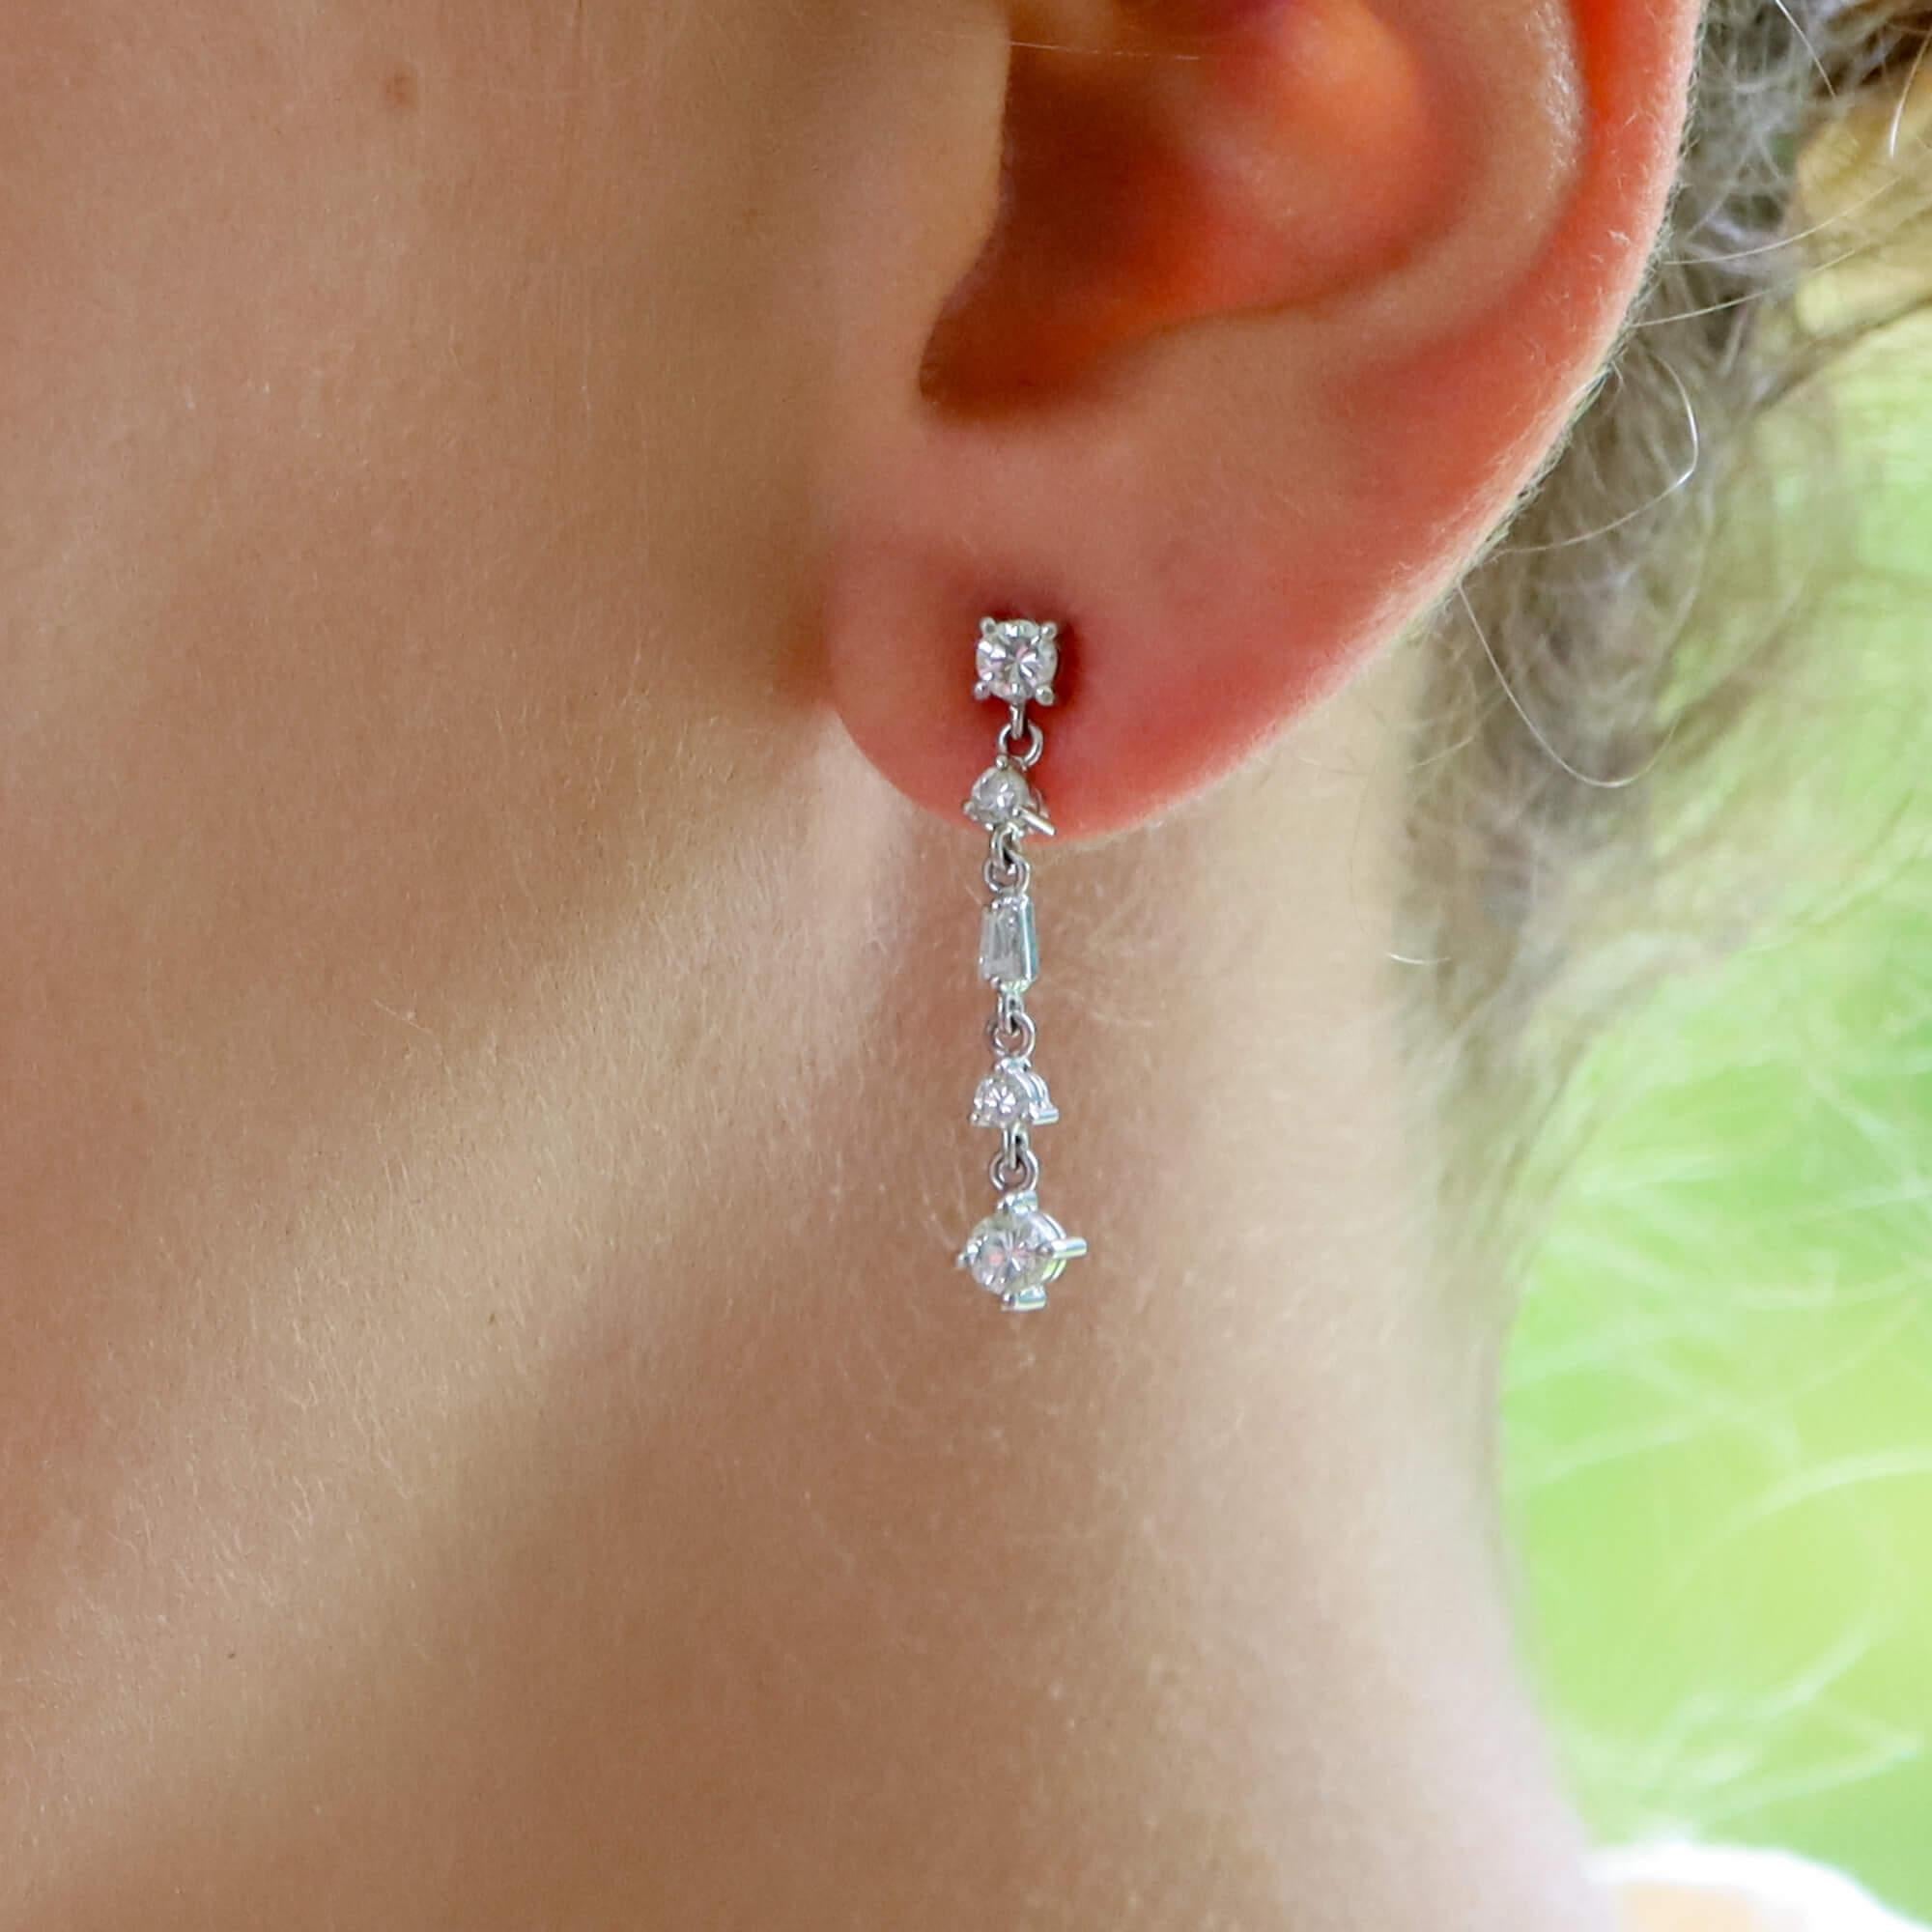 A beautiful pair of diamond drop earrings set in 14k white gold.

Each earring is composed of simple drop of 5 diamonds, all connected by an articulated bail. Each diamond is securely claw set and all hang elegantly from the ear.

There is a